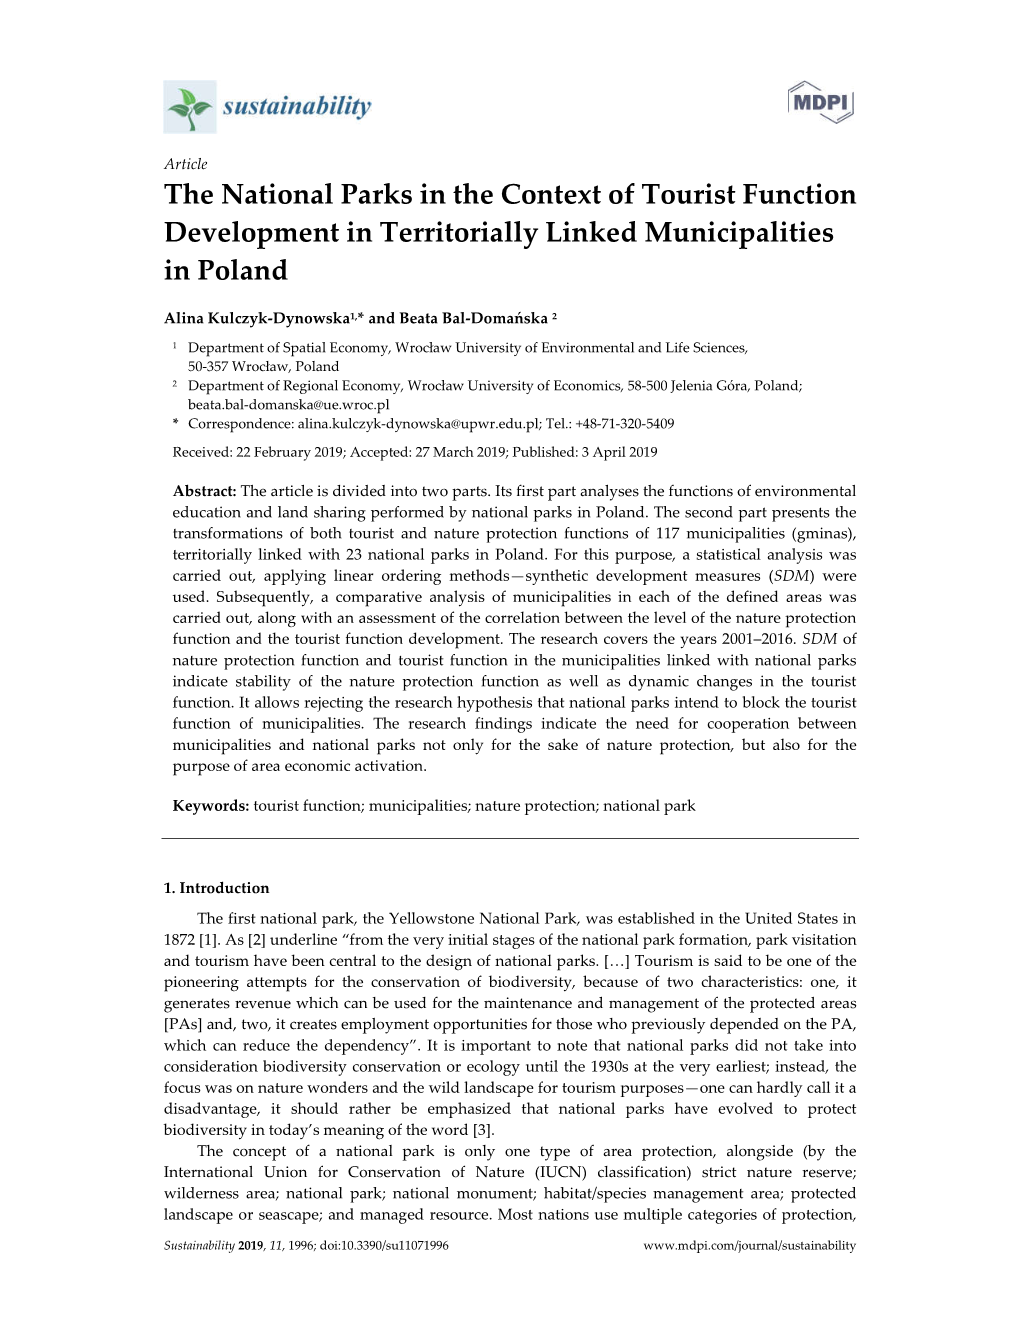 The National Parks in the Context of Tourist Function Development in Territorially Linked Municipalities in Poland